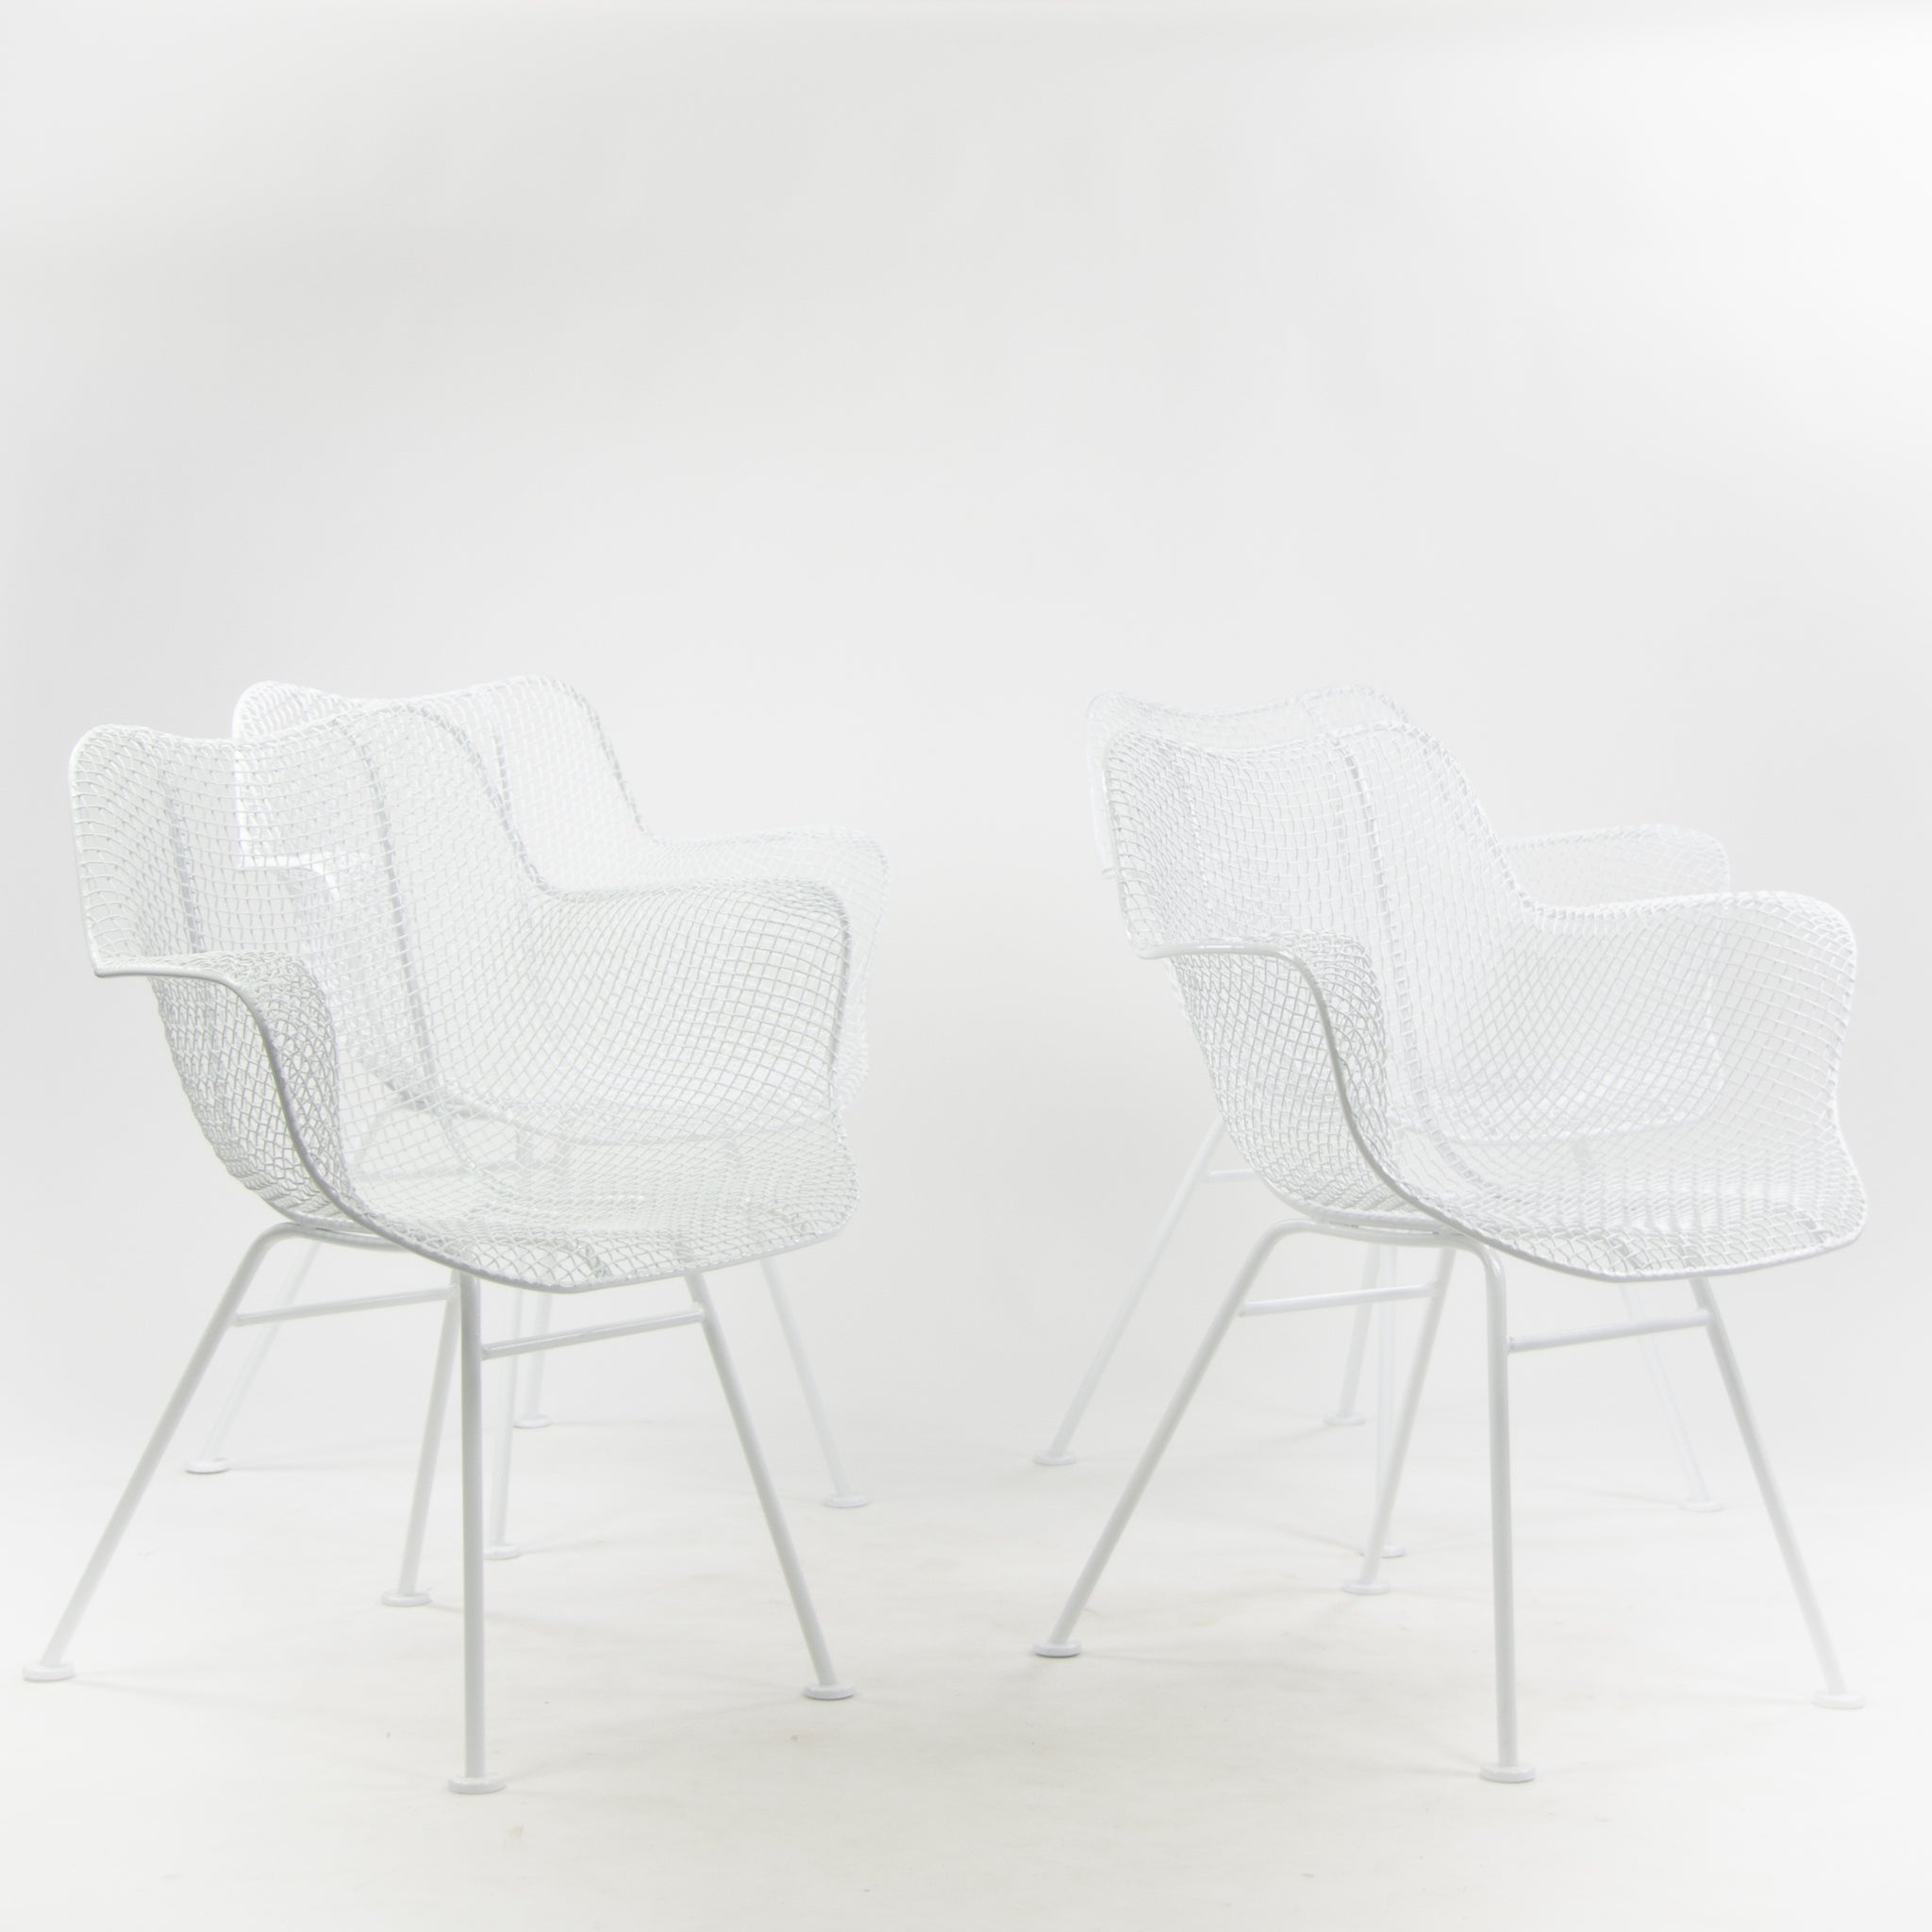 SOLD Russell Woodard 1960's Vintage Sculptura Outdoor Dining Chairs New Powder Coated Finish